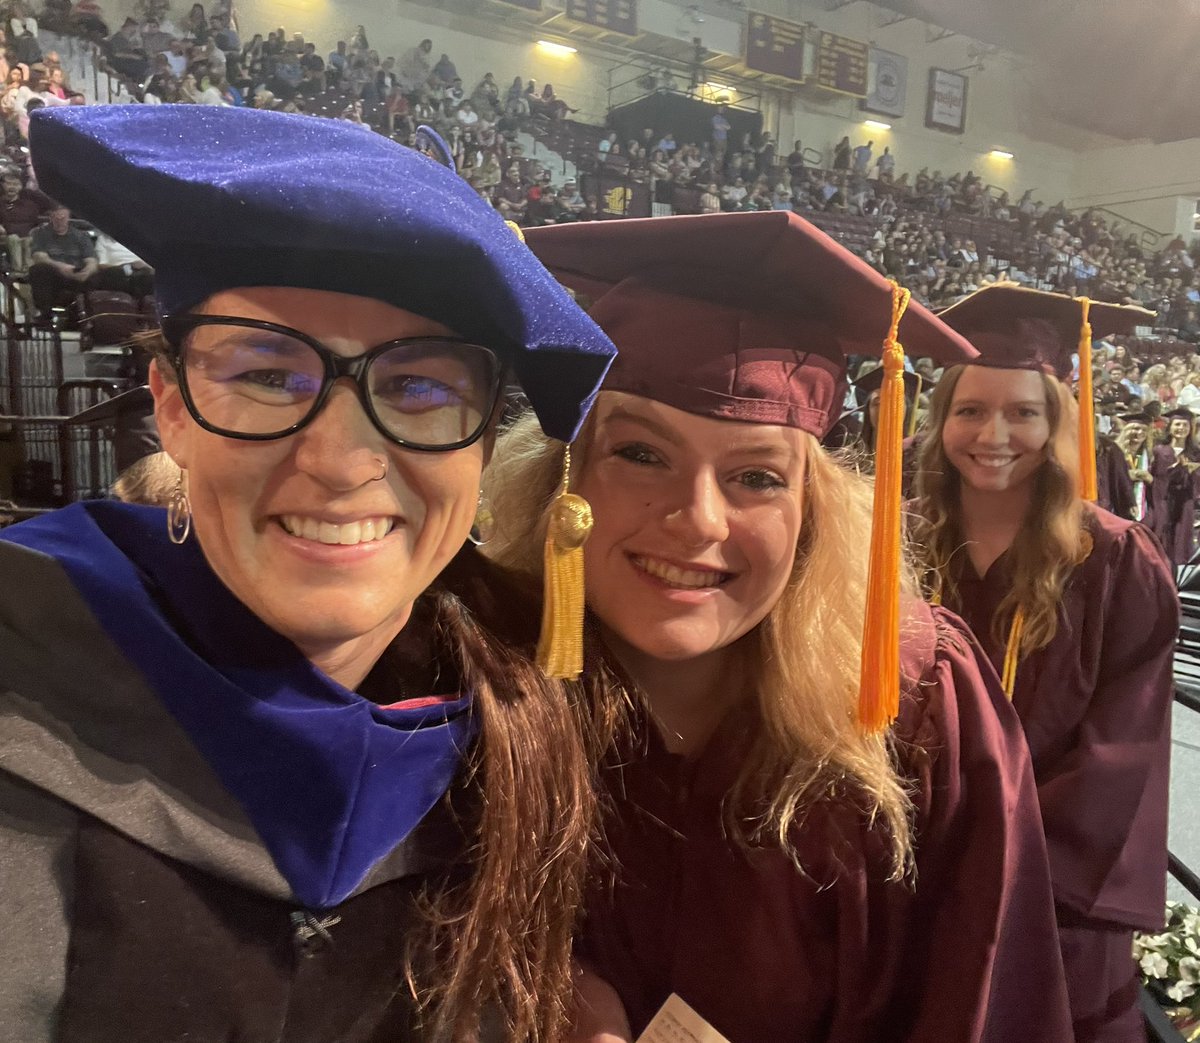 Our graduates celebrate in such fun and creative ways! Repping student groups and special classes on the their gowns; utilizing the climbing wall and selfies on the stage with faculty! FINISHED IN FINCH! 🔥👆🎓 @cmuniversity @cmuehs @cmualumni